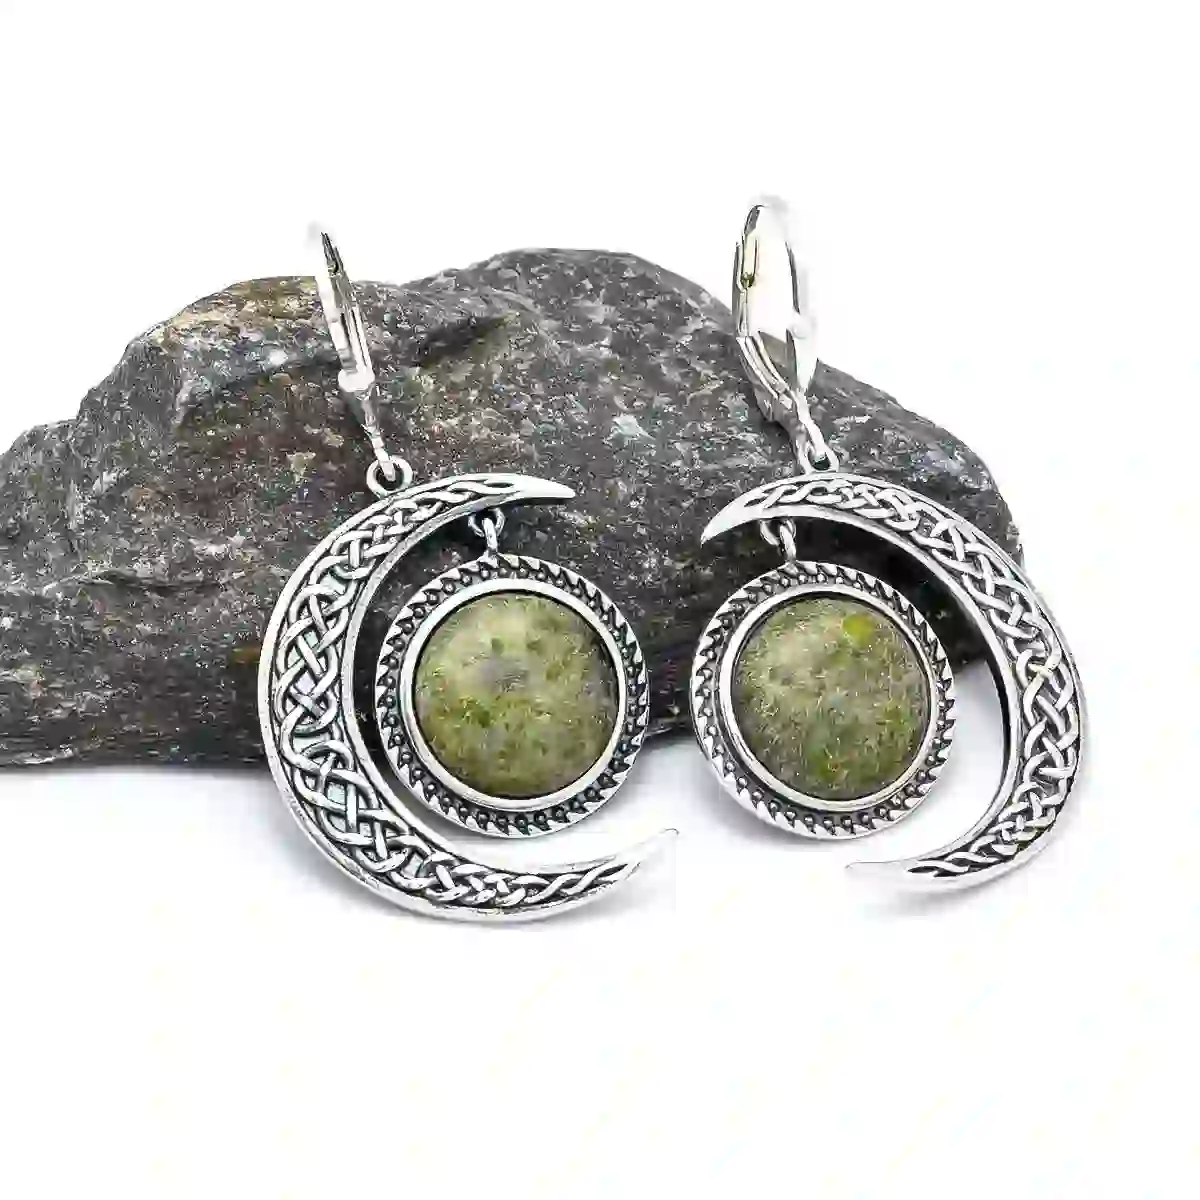 Connemara Marble Celtic Sun and Moon Earrings in Sterling Silver...